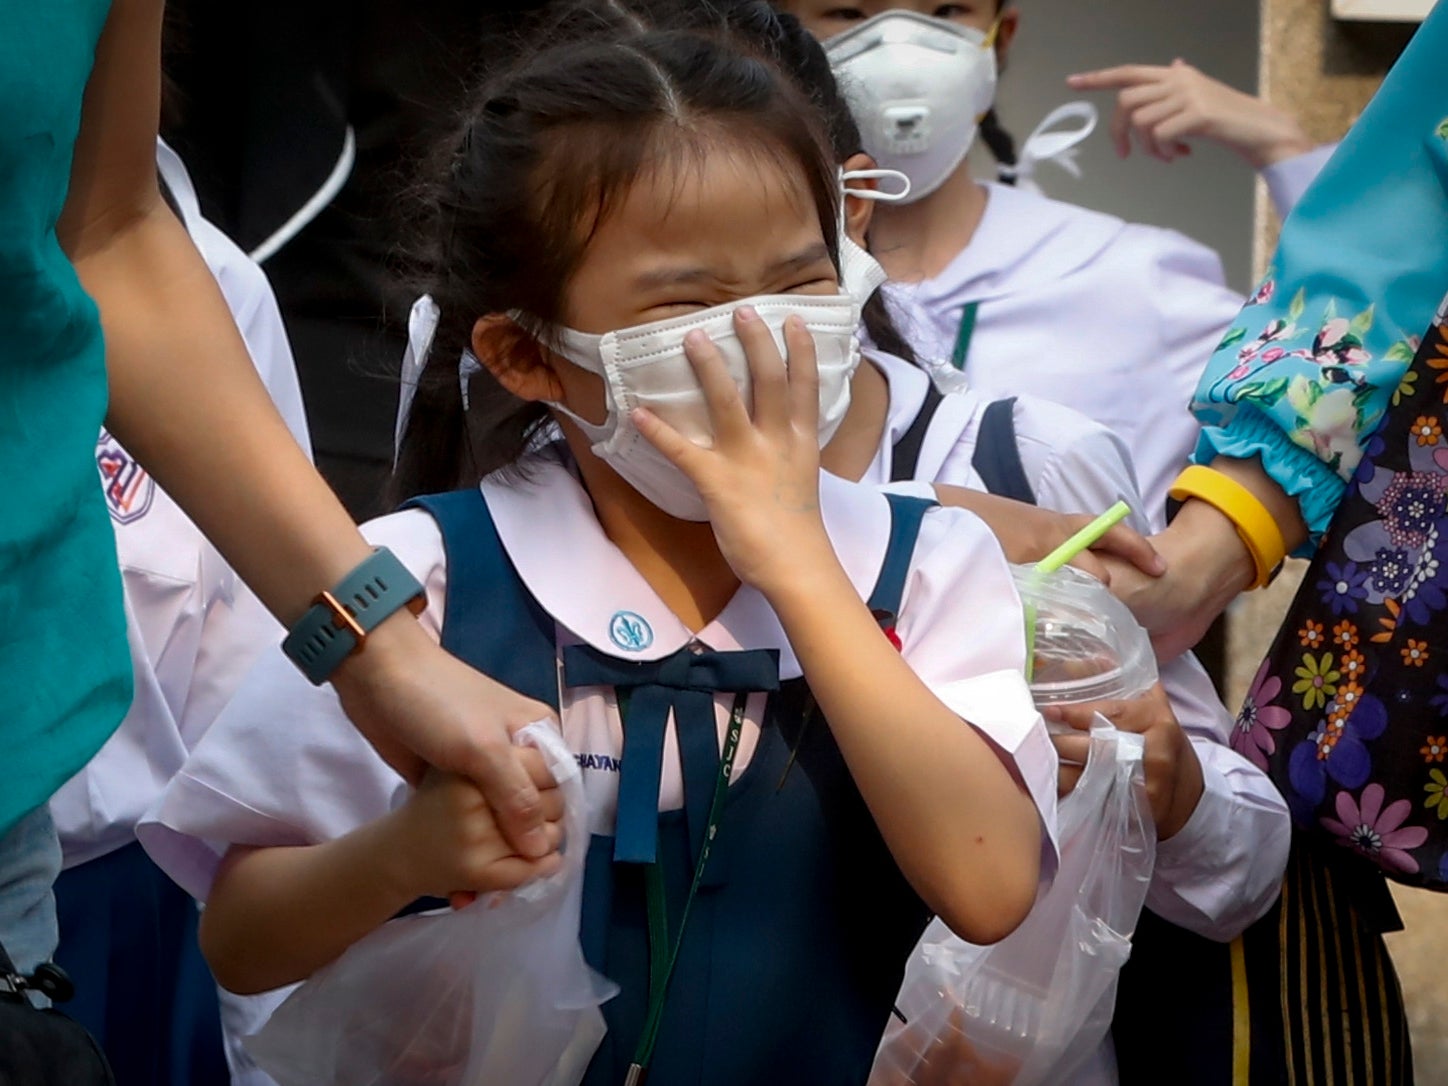 Air pollution is a major problem in cities such as Bangkok